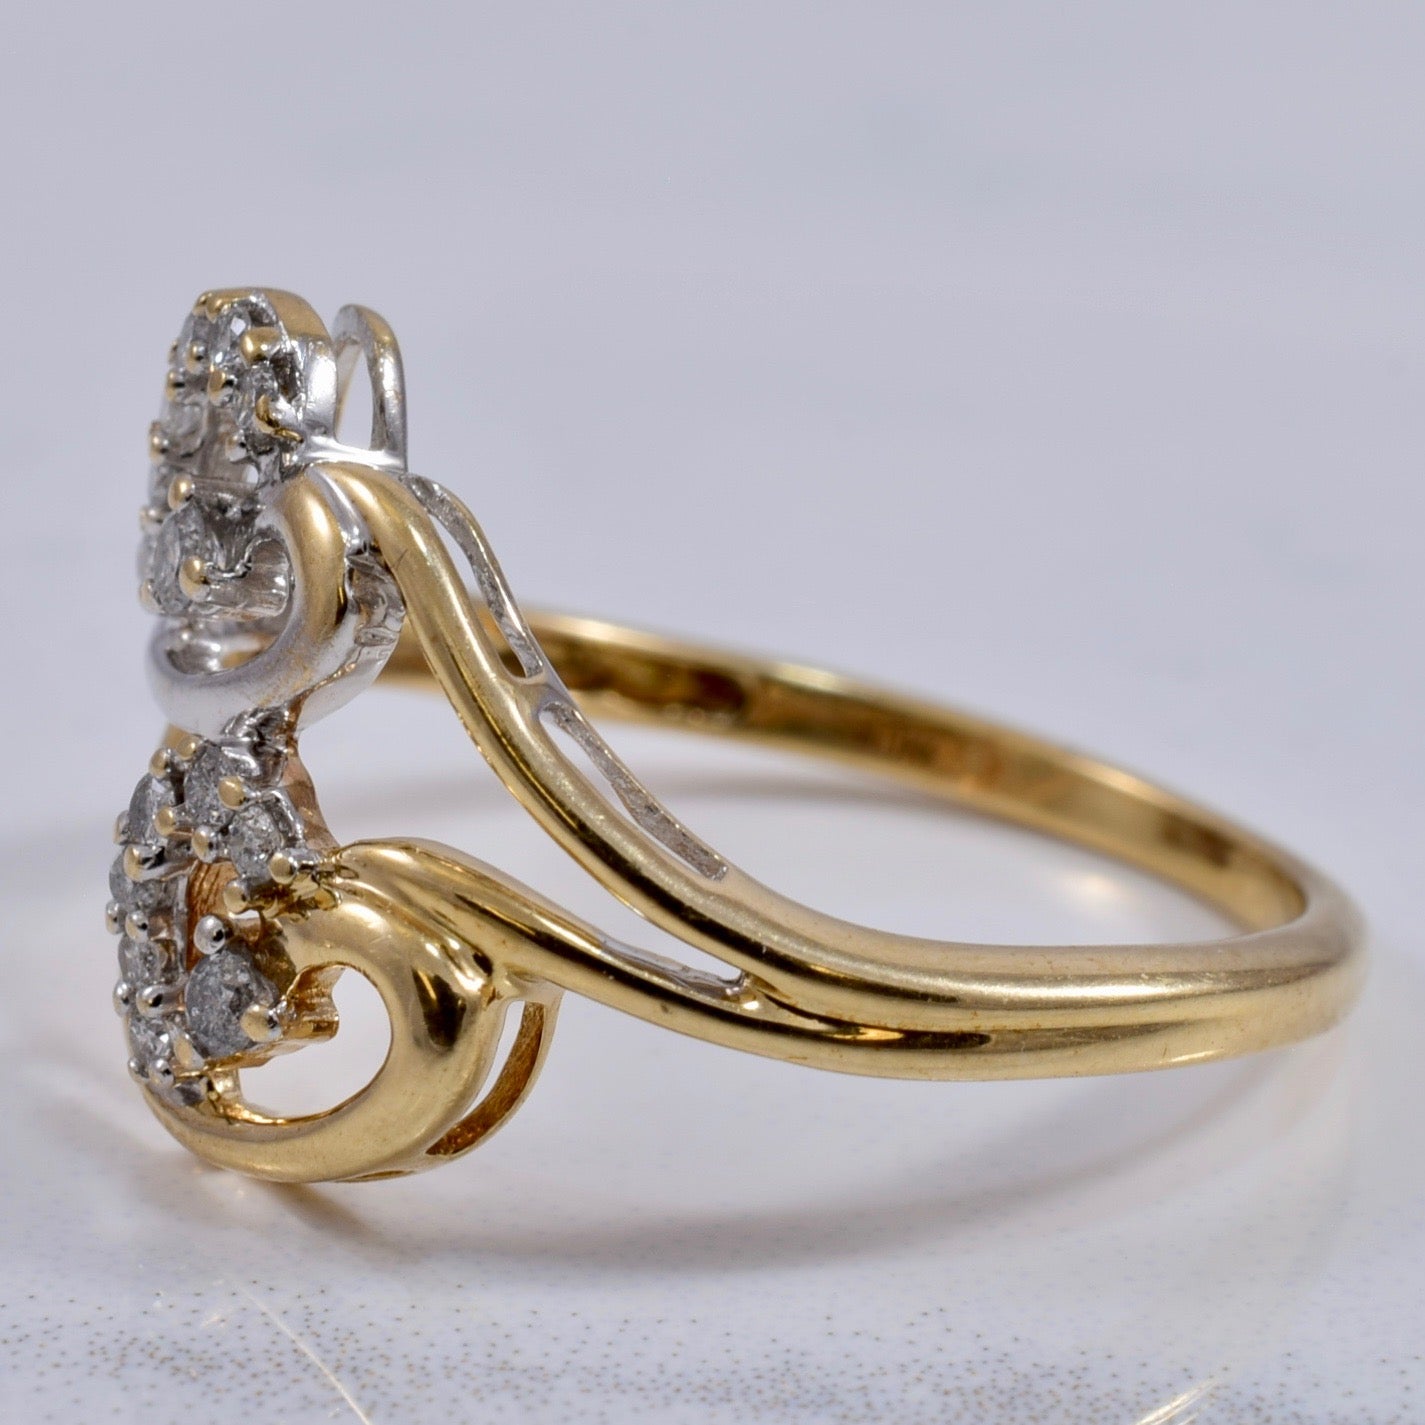 Heart Shaped Ring With Diamonds | 0.14 ctw SZ 7.25 |